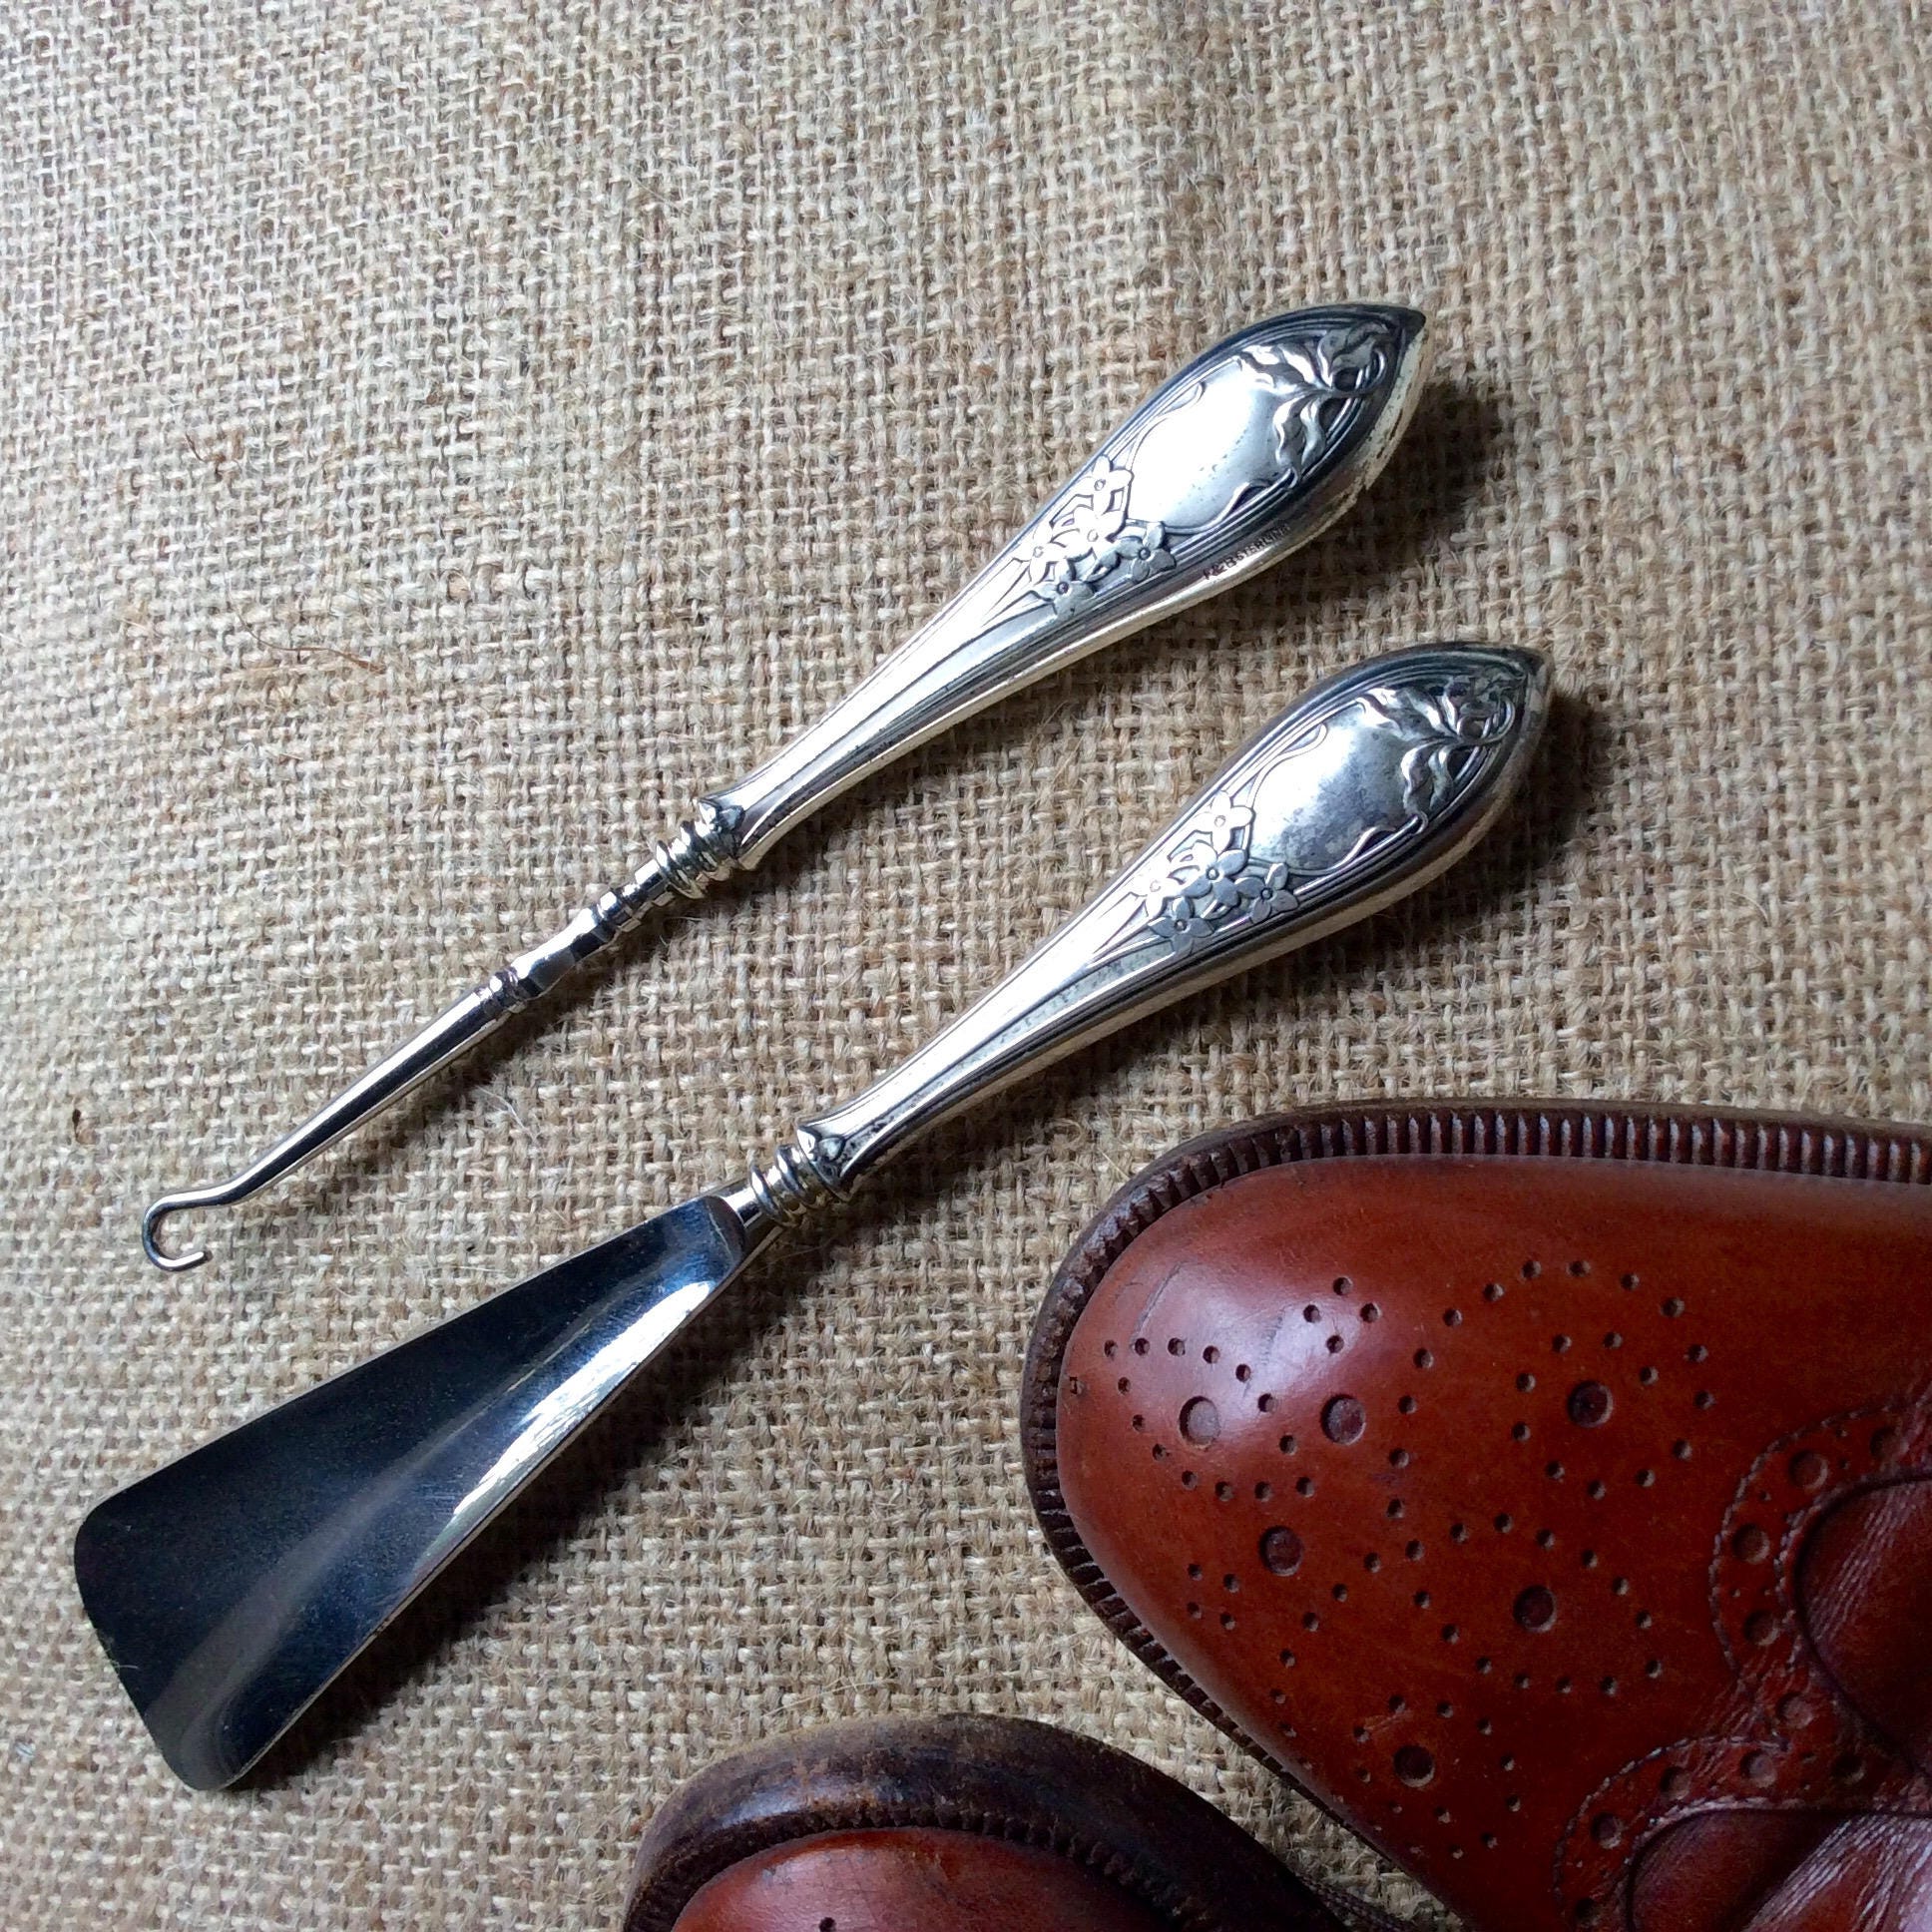 Antique buttonhooks and shoehorns. A buttonhook is a tool used to  facilitate the closing of shoes, gl…